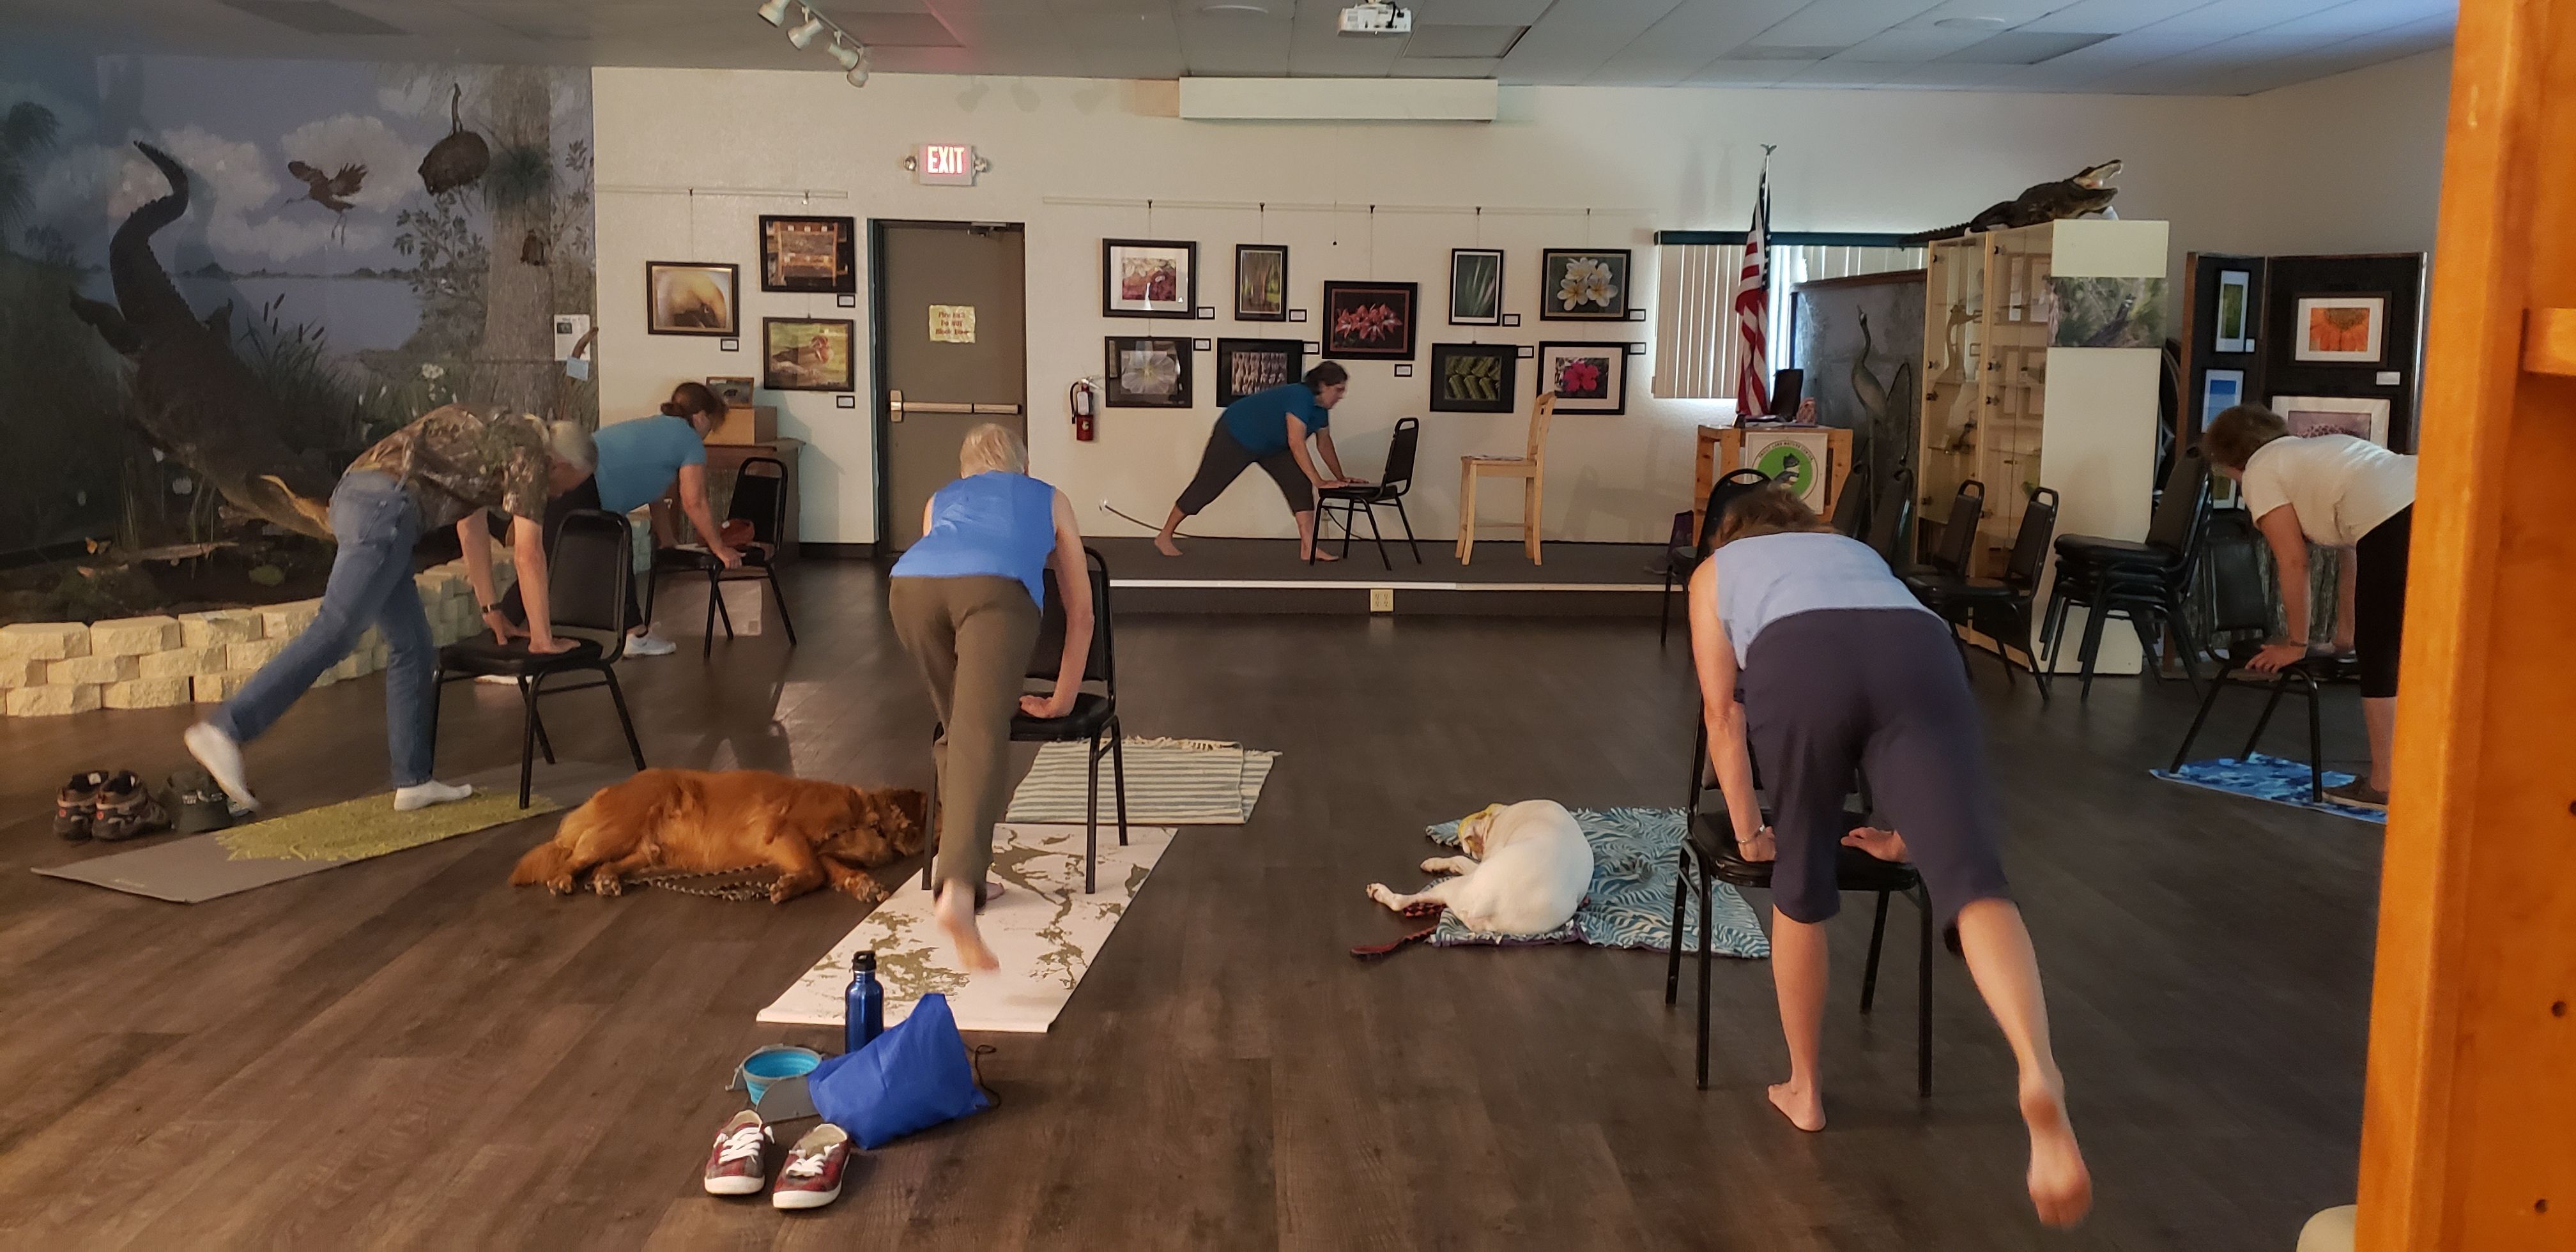 Yoga participants doing a yoga position using chairs or the floor.